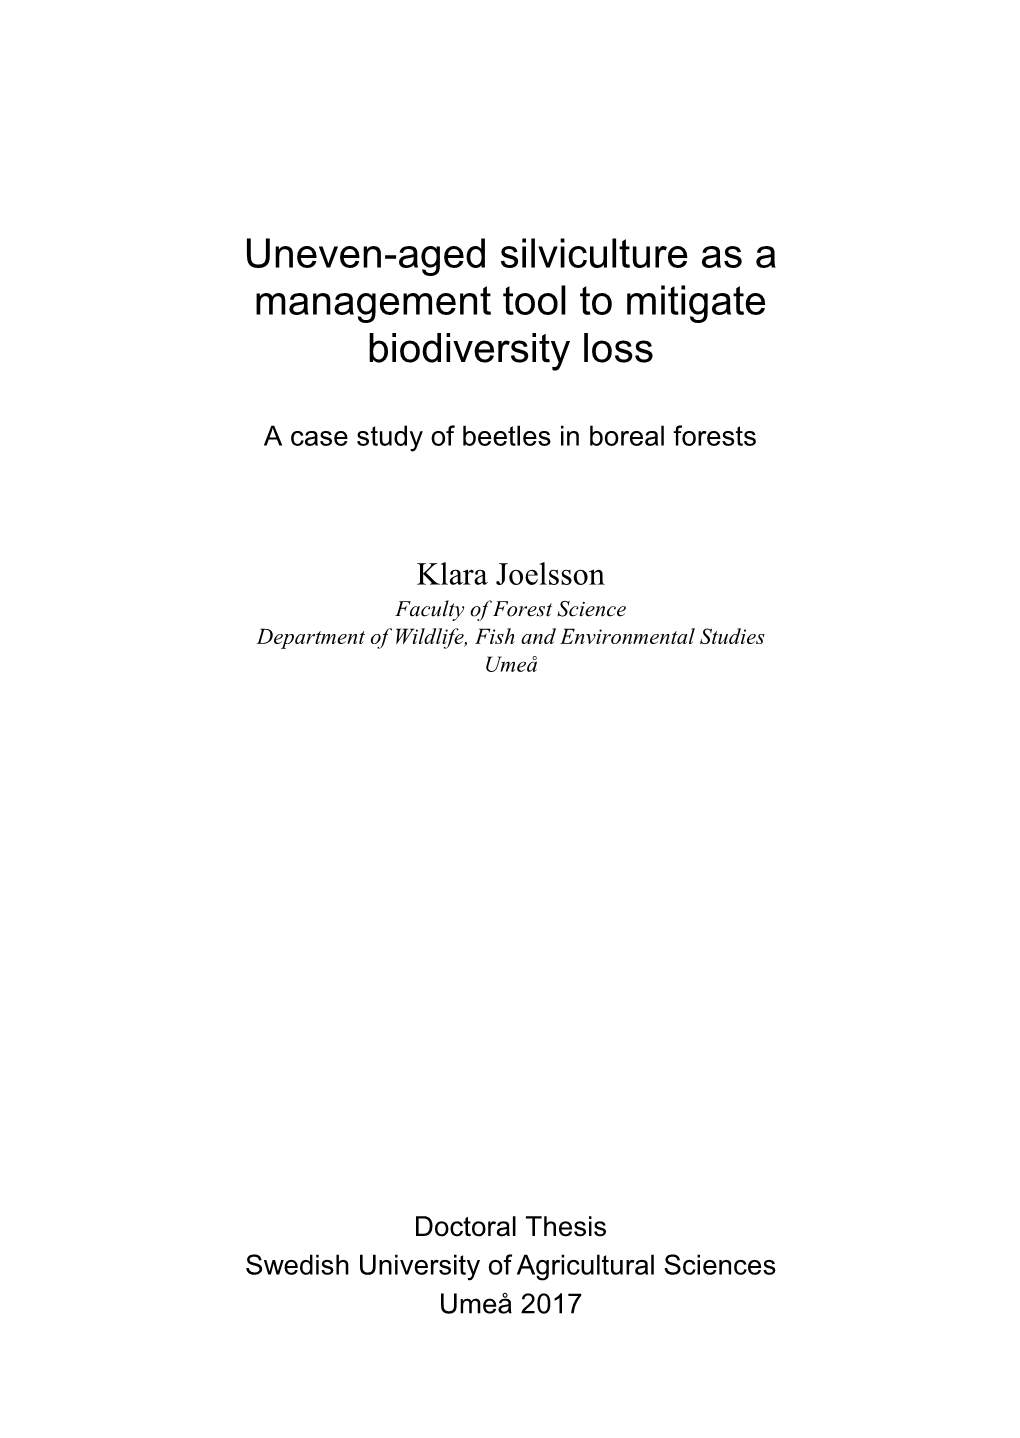 Uneven-Aged Silviculture As a Management Tool to Mitigate Biodiversity Loss